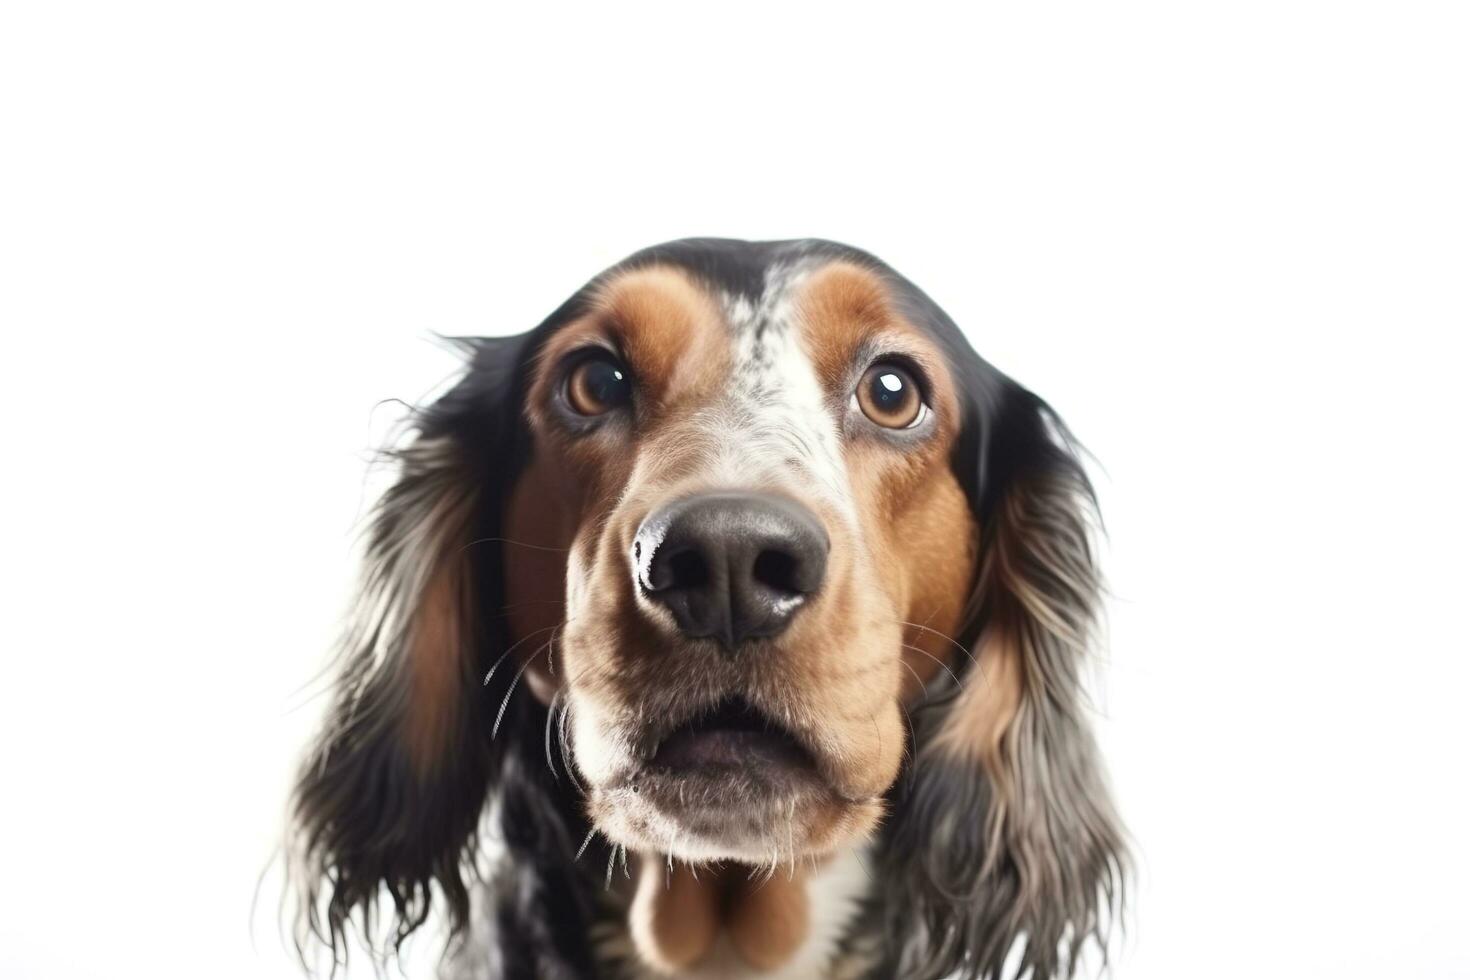 Studio shot of an adorable Dachshund looking curiously at the camera, generate ai photo